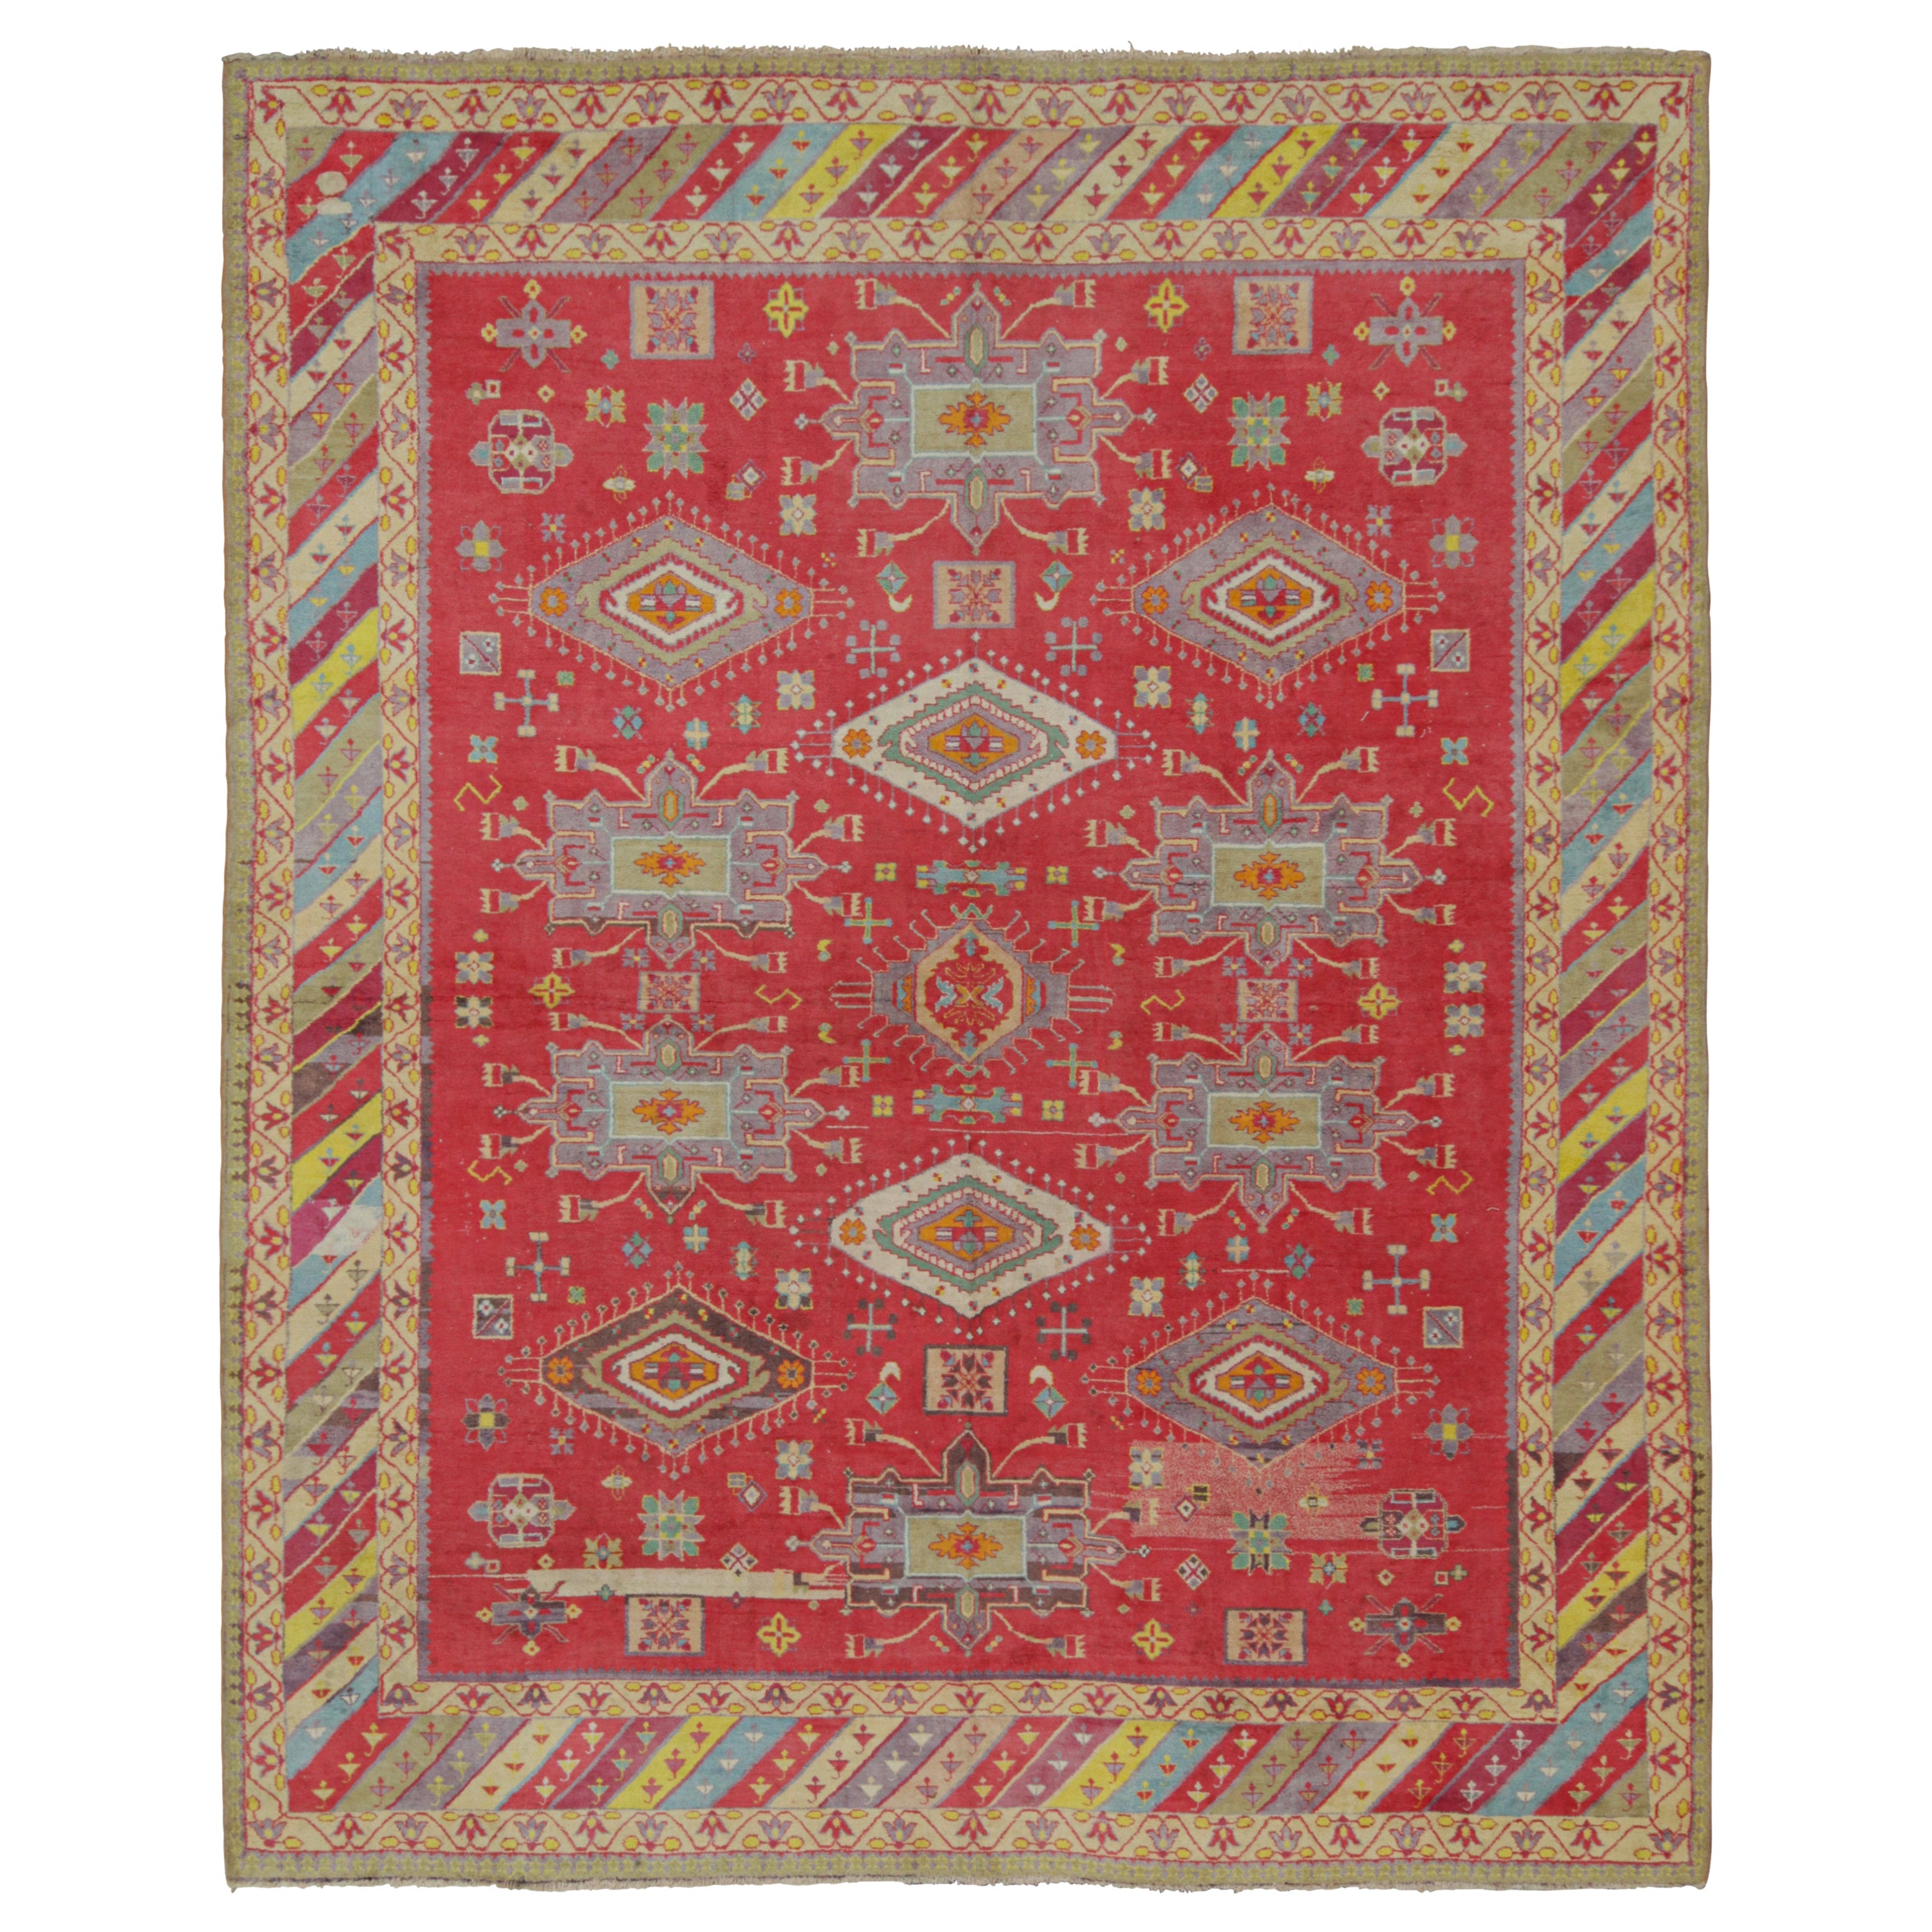 Antique Agra Rug in Red with Colorful Geometric Patterns, from Rug & Kilim For Sale